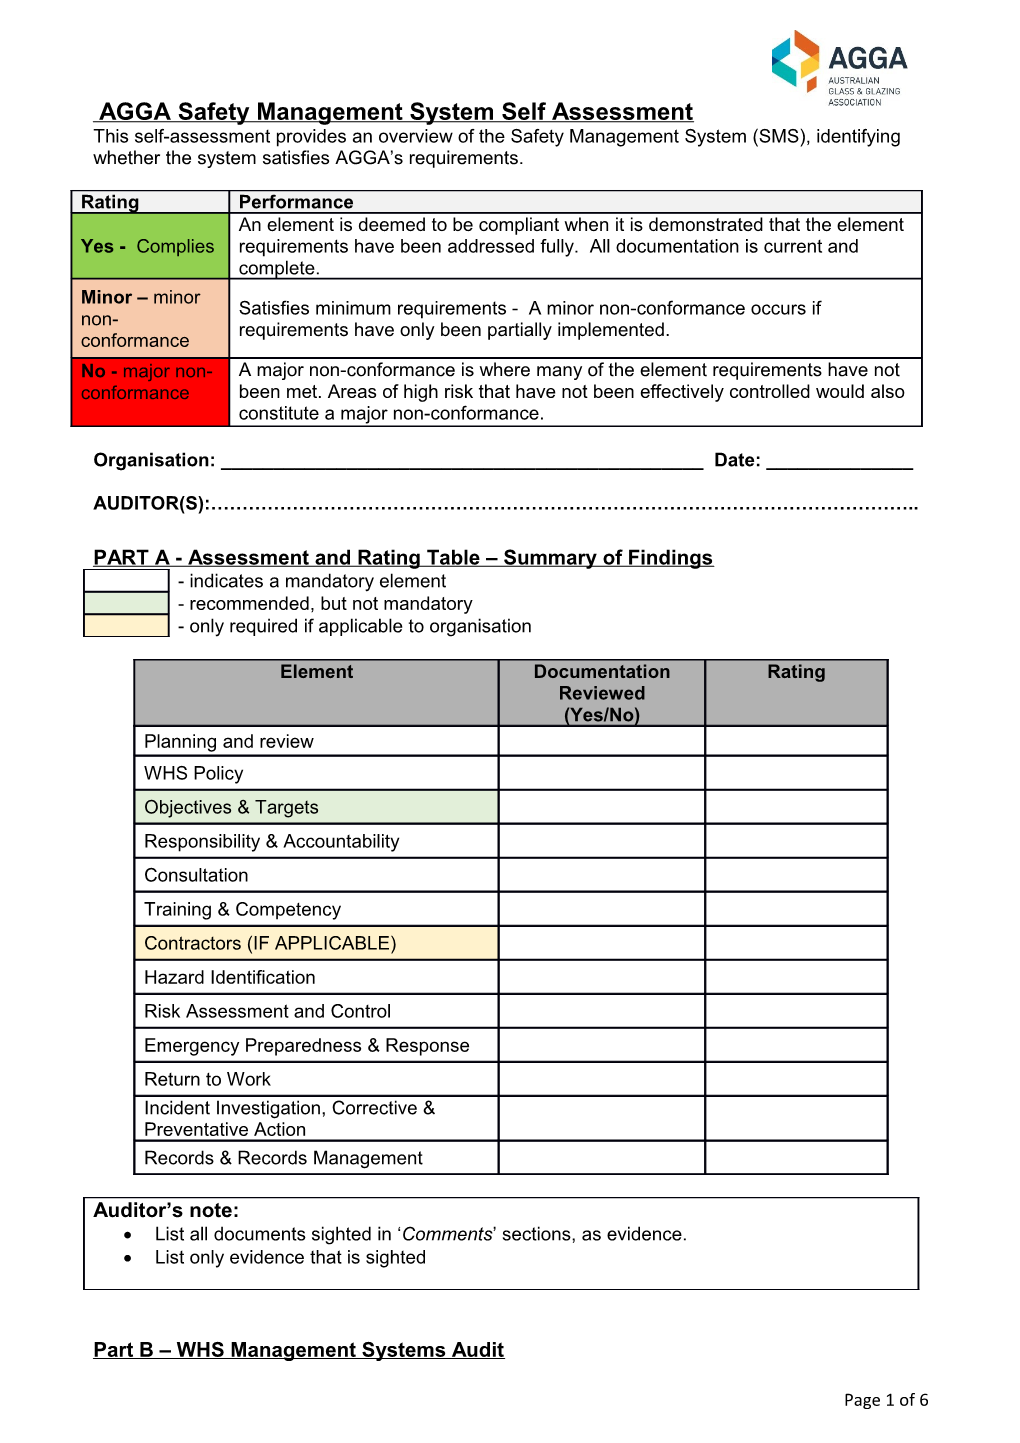 PART a -Assessment and Rating Table Summary of Findings